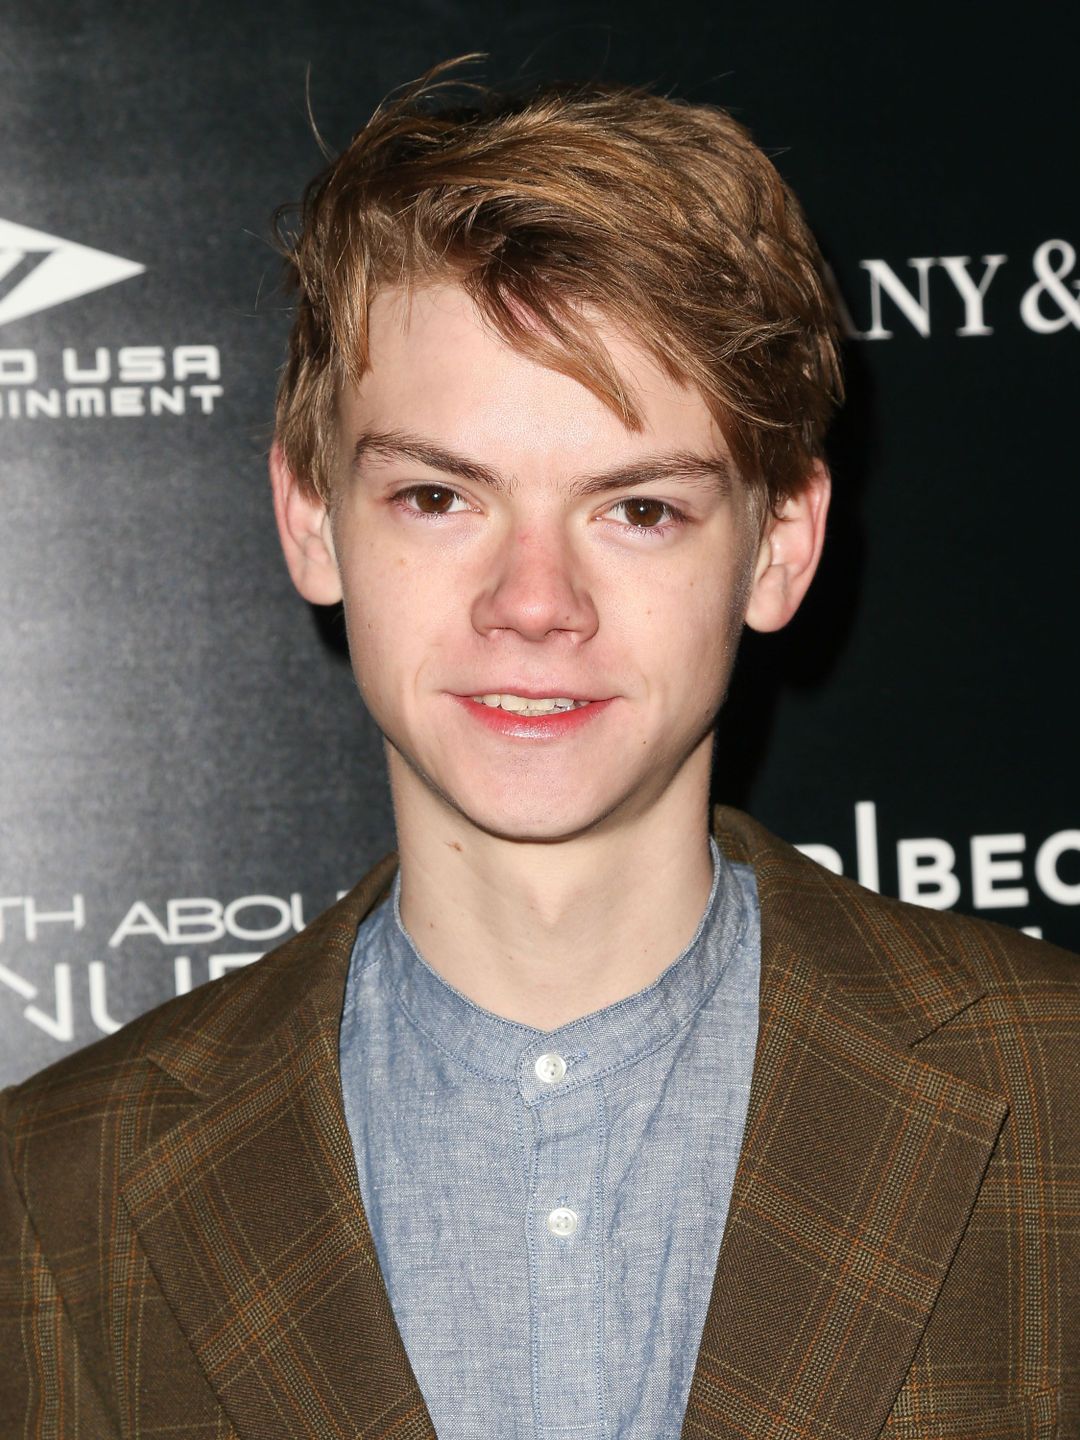 Thomas Sangster early life